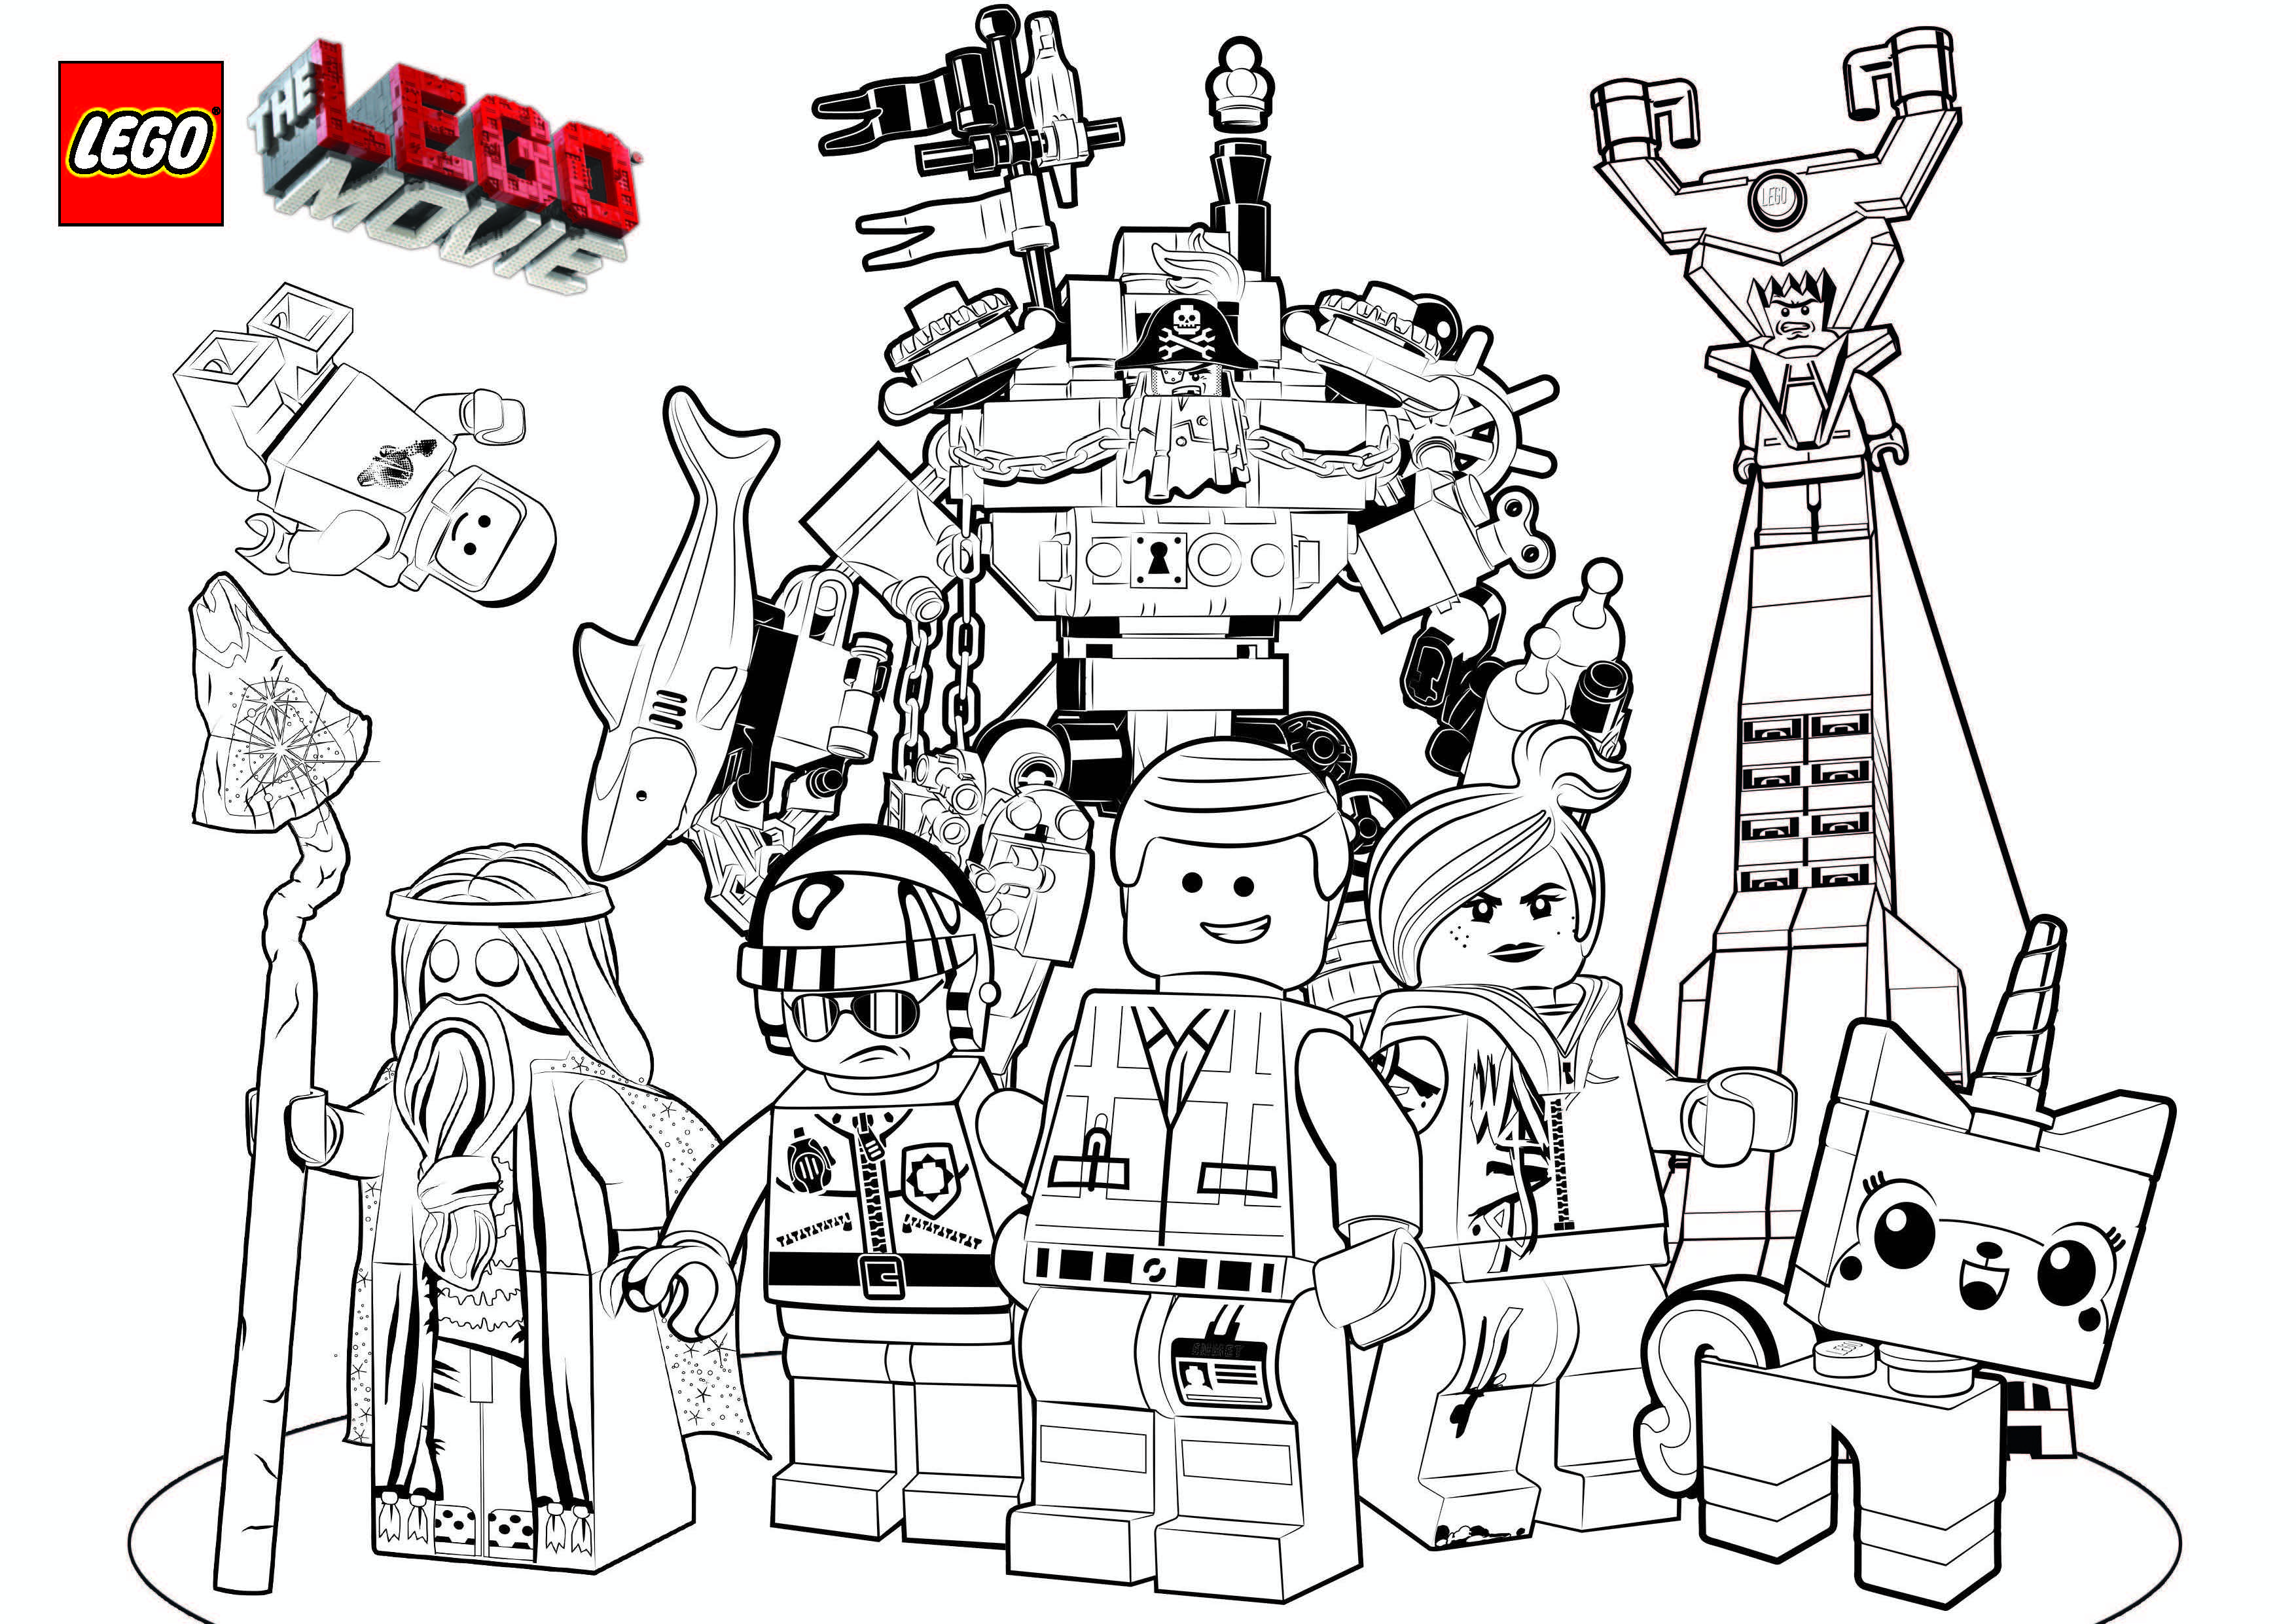 Download Lego Movie Coloring Pages - Best Coloring Pages For Kids